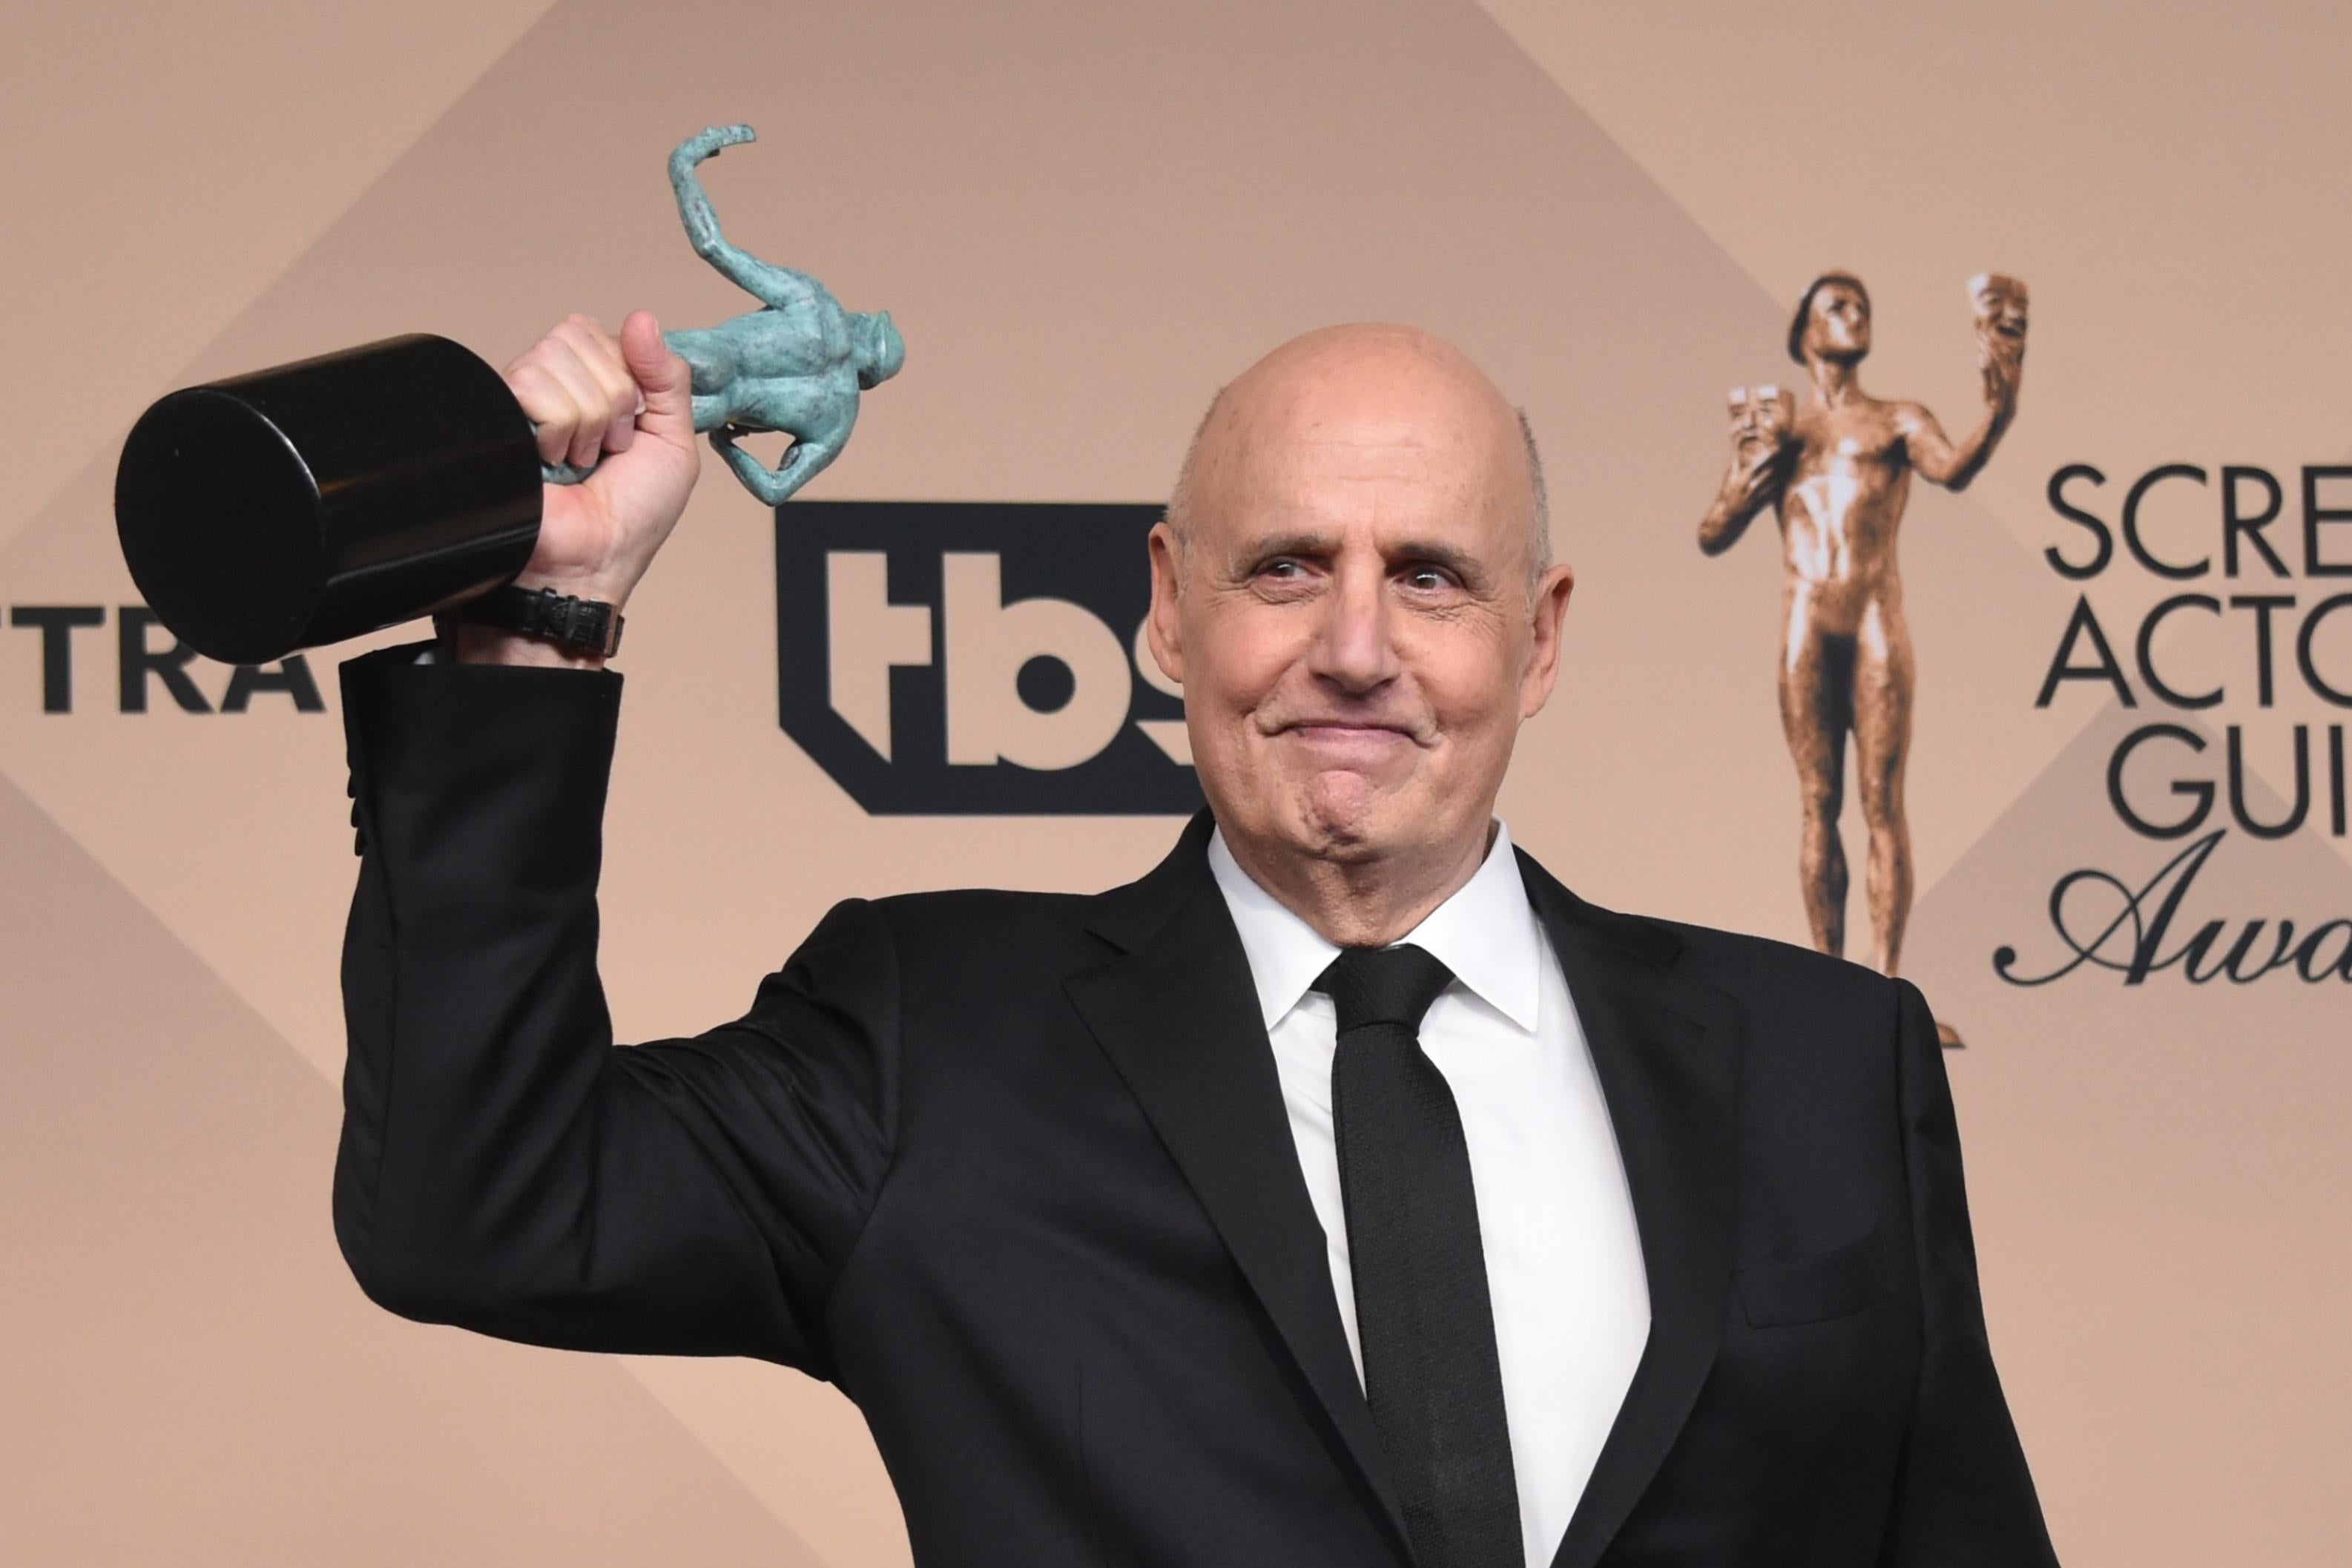 JeffreyTambor,  winning Actor for Outstanding Performance by a Male Actor in a Comedy Series for his performance as Maura Pfefferman on Amazons Transparent,  poses in the press room at the 22nd Annual Screen Actors Guild Awards at The Shrine Auditorium on January 30, 2016 in Los Angeles, California. / AFP / FREDERIC J. BROWN        (Photo credit should read FREDERIC J. BROWN/AFP/Getty Images)